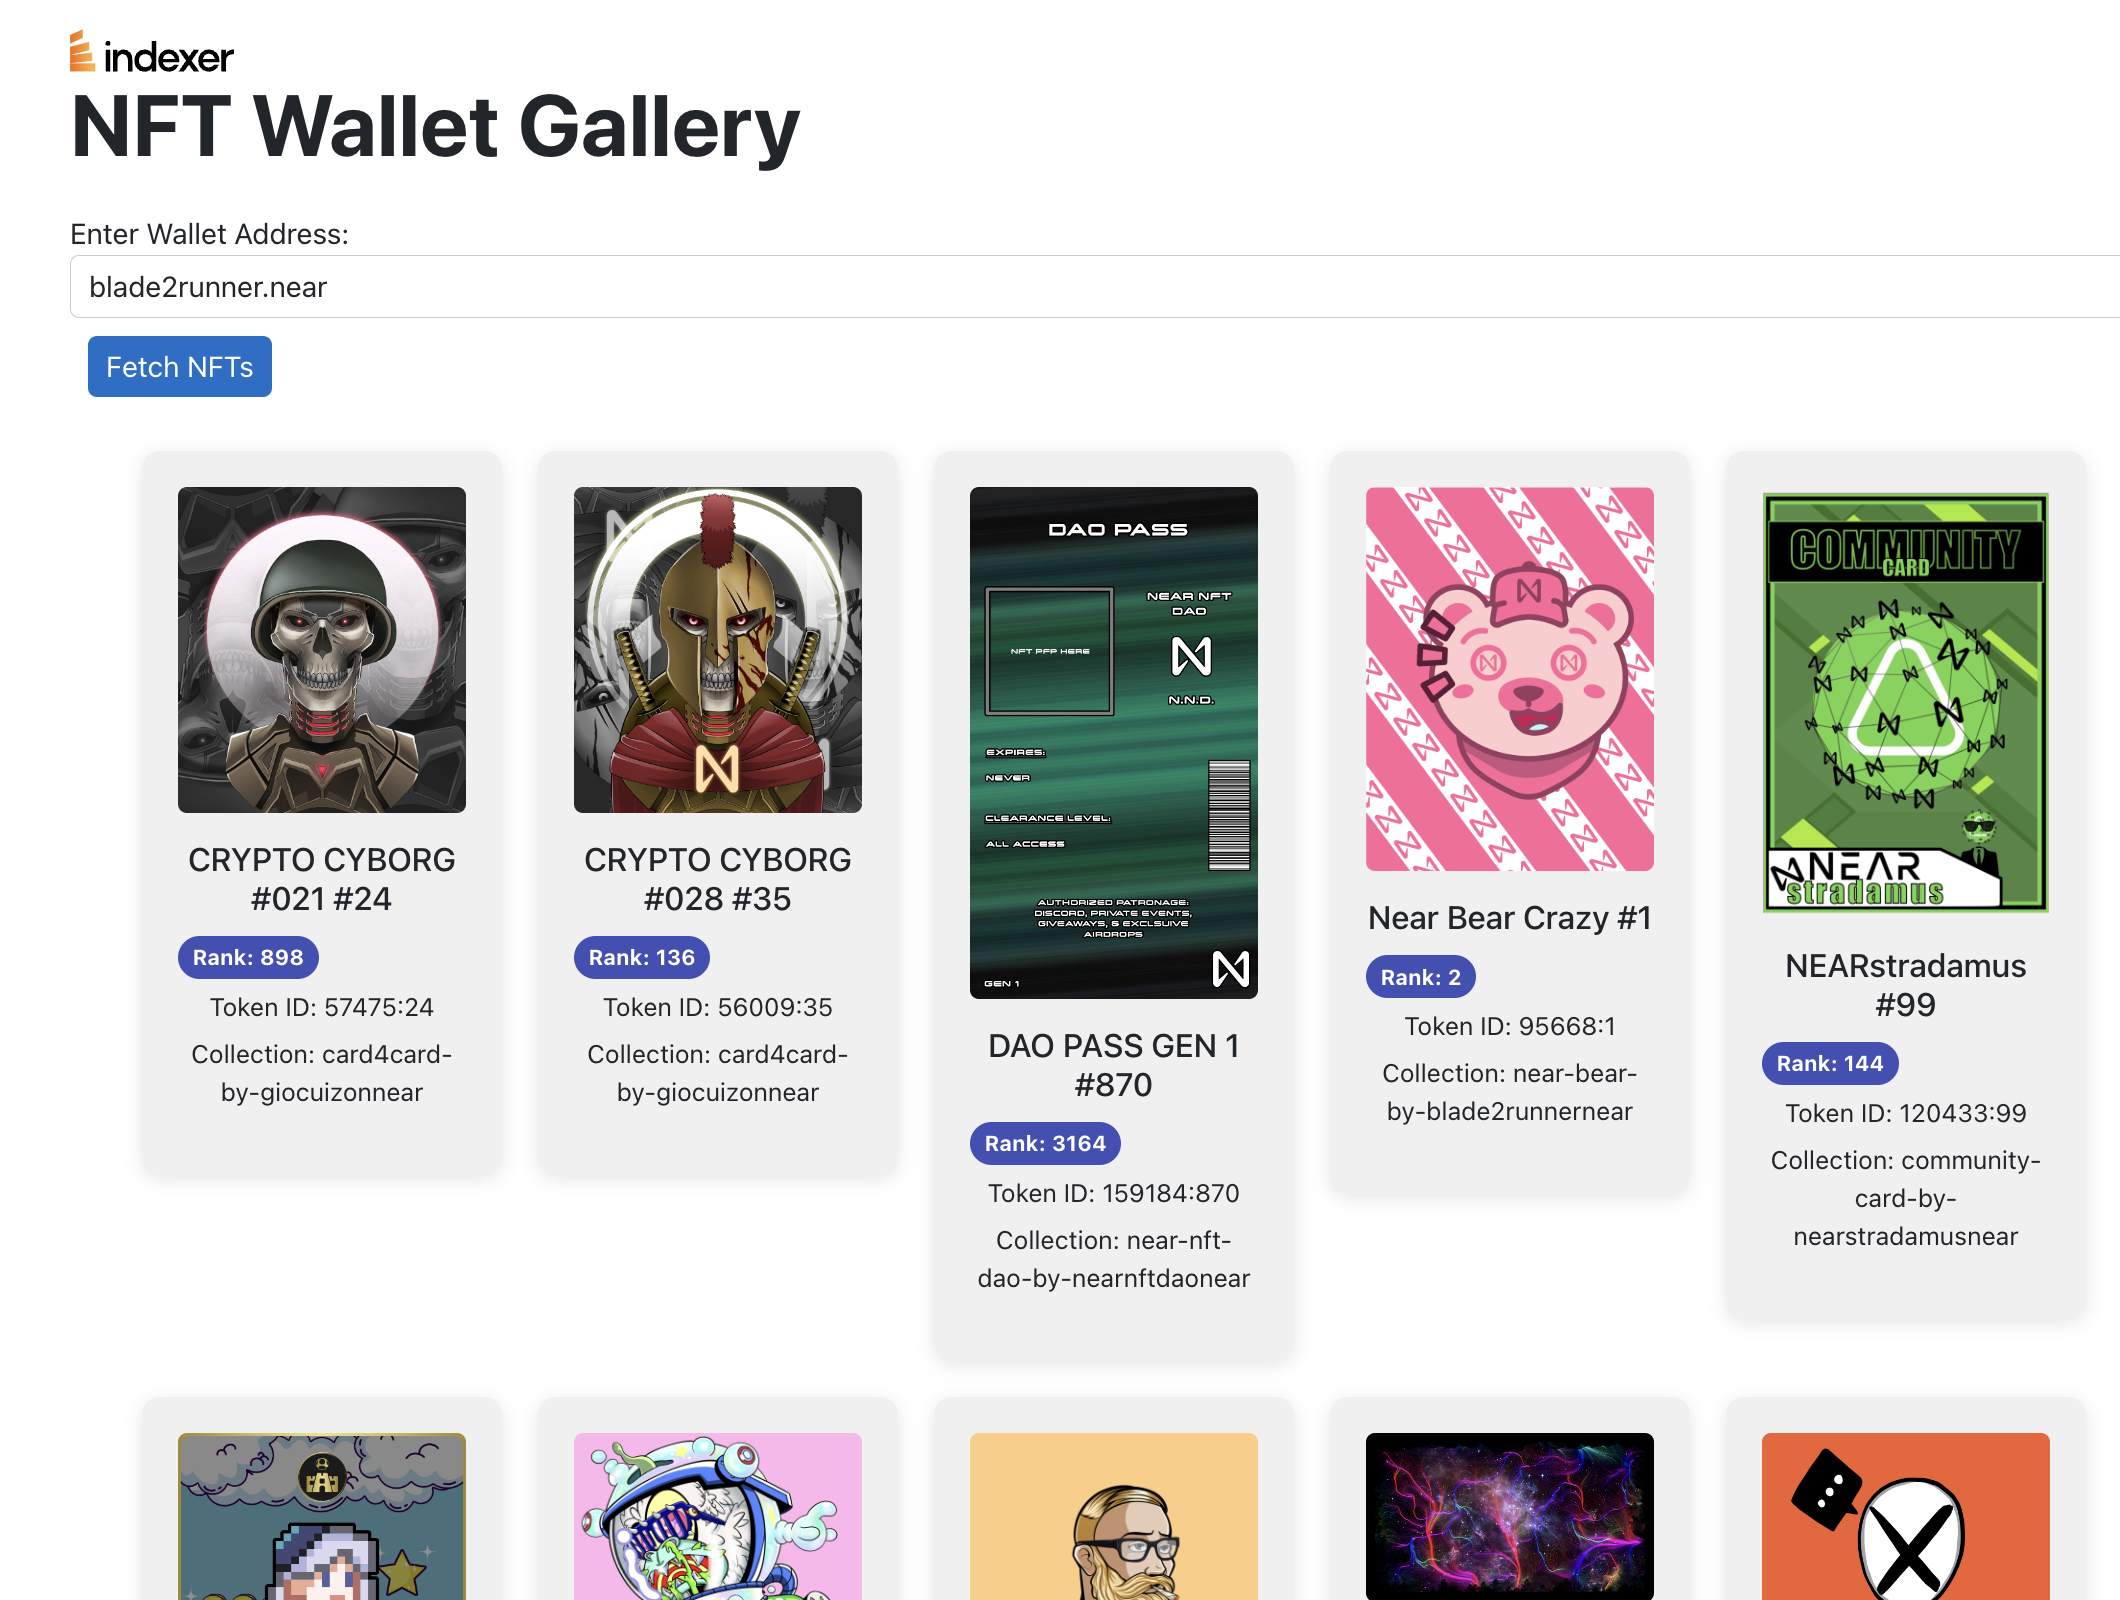 Build Your Own NFT Wallet Gallery with near.social and indexer.xyz